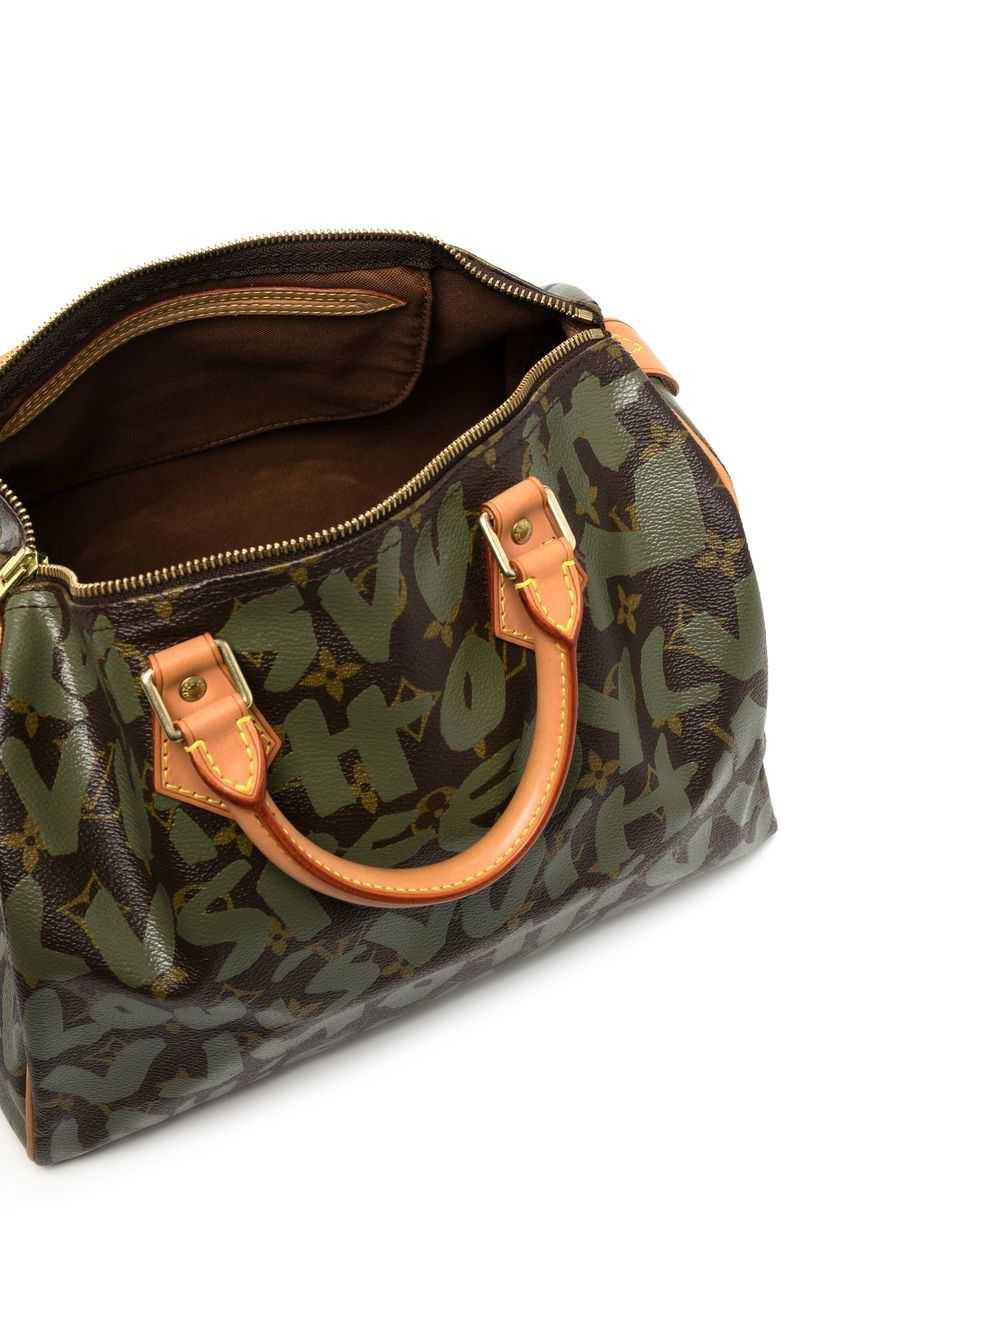 Louis Vuitton x Stephen Sprouse 2001 pre-owned Sp… - image 5